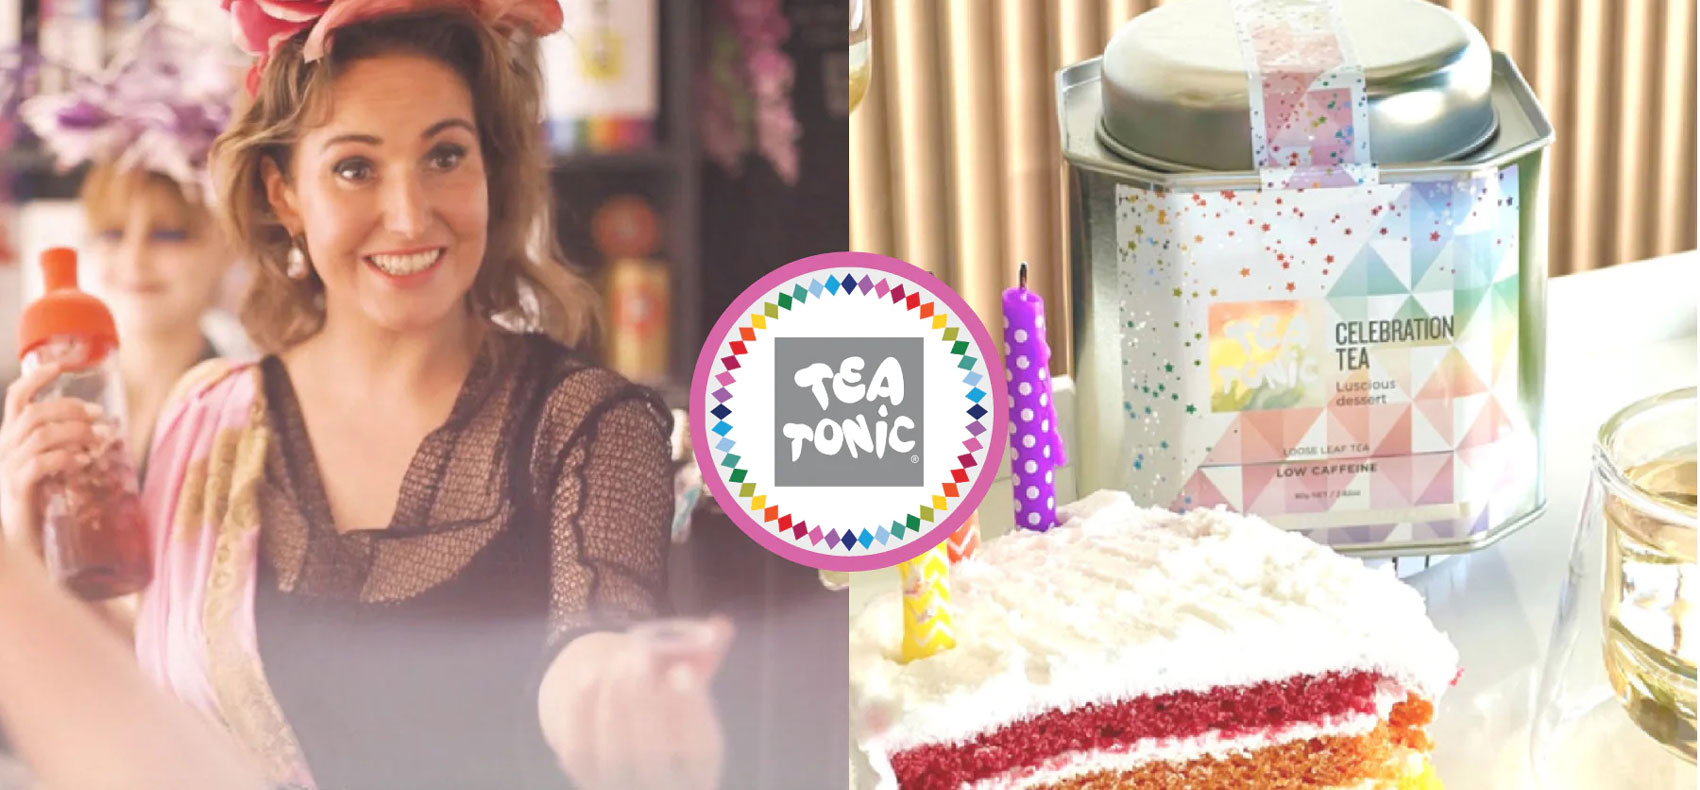 Let them Drink Cake: Celebrating 25 years with Tea Tonic